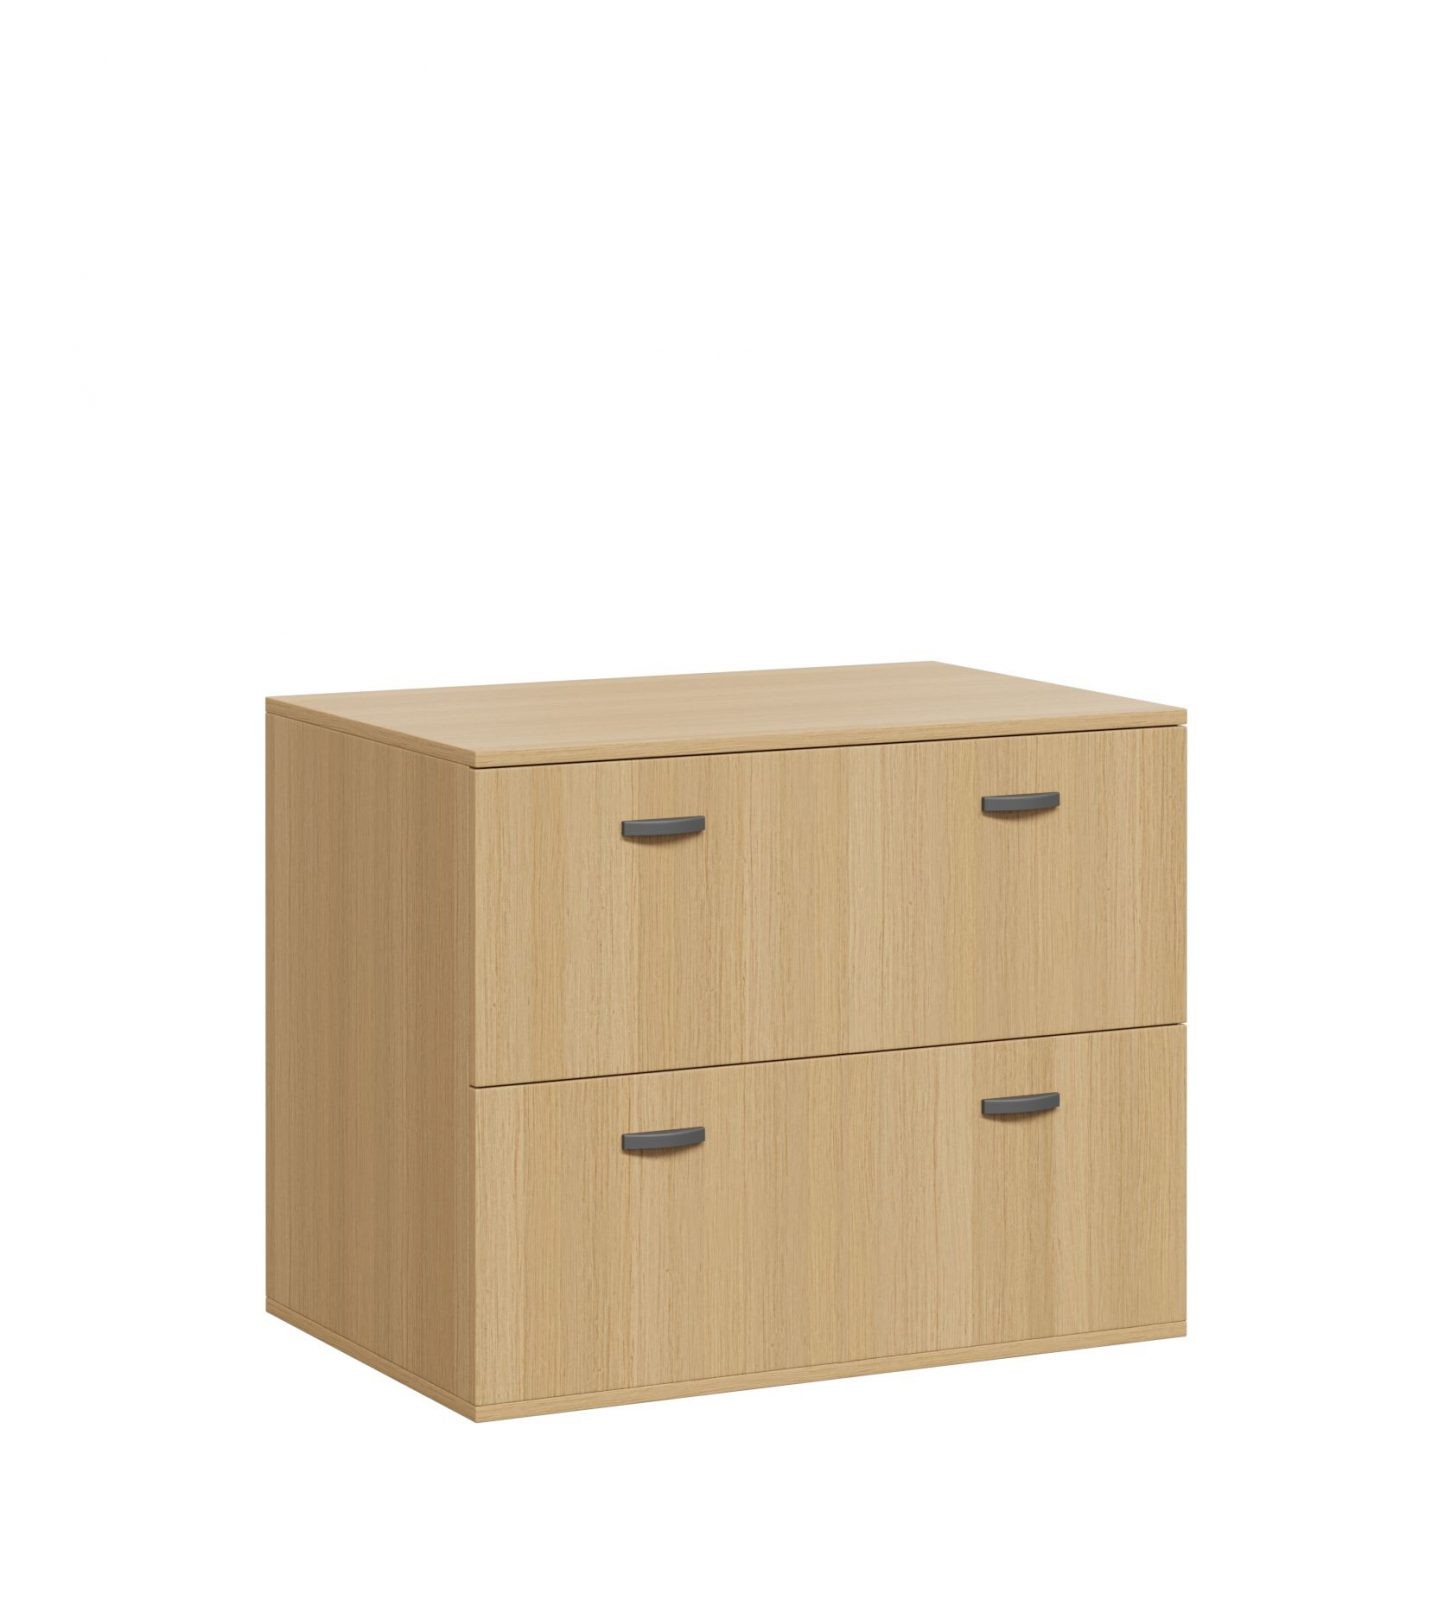 DD Lateral Filing Cabinet